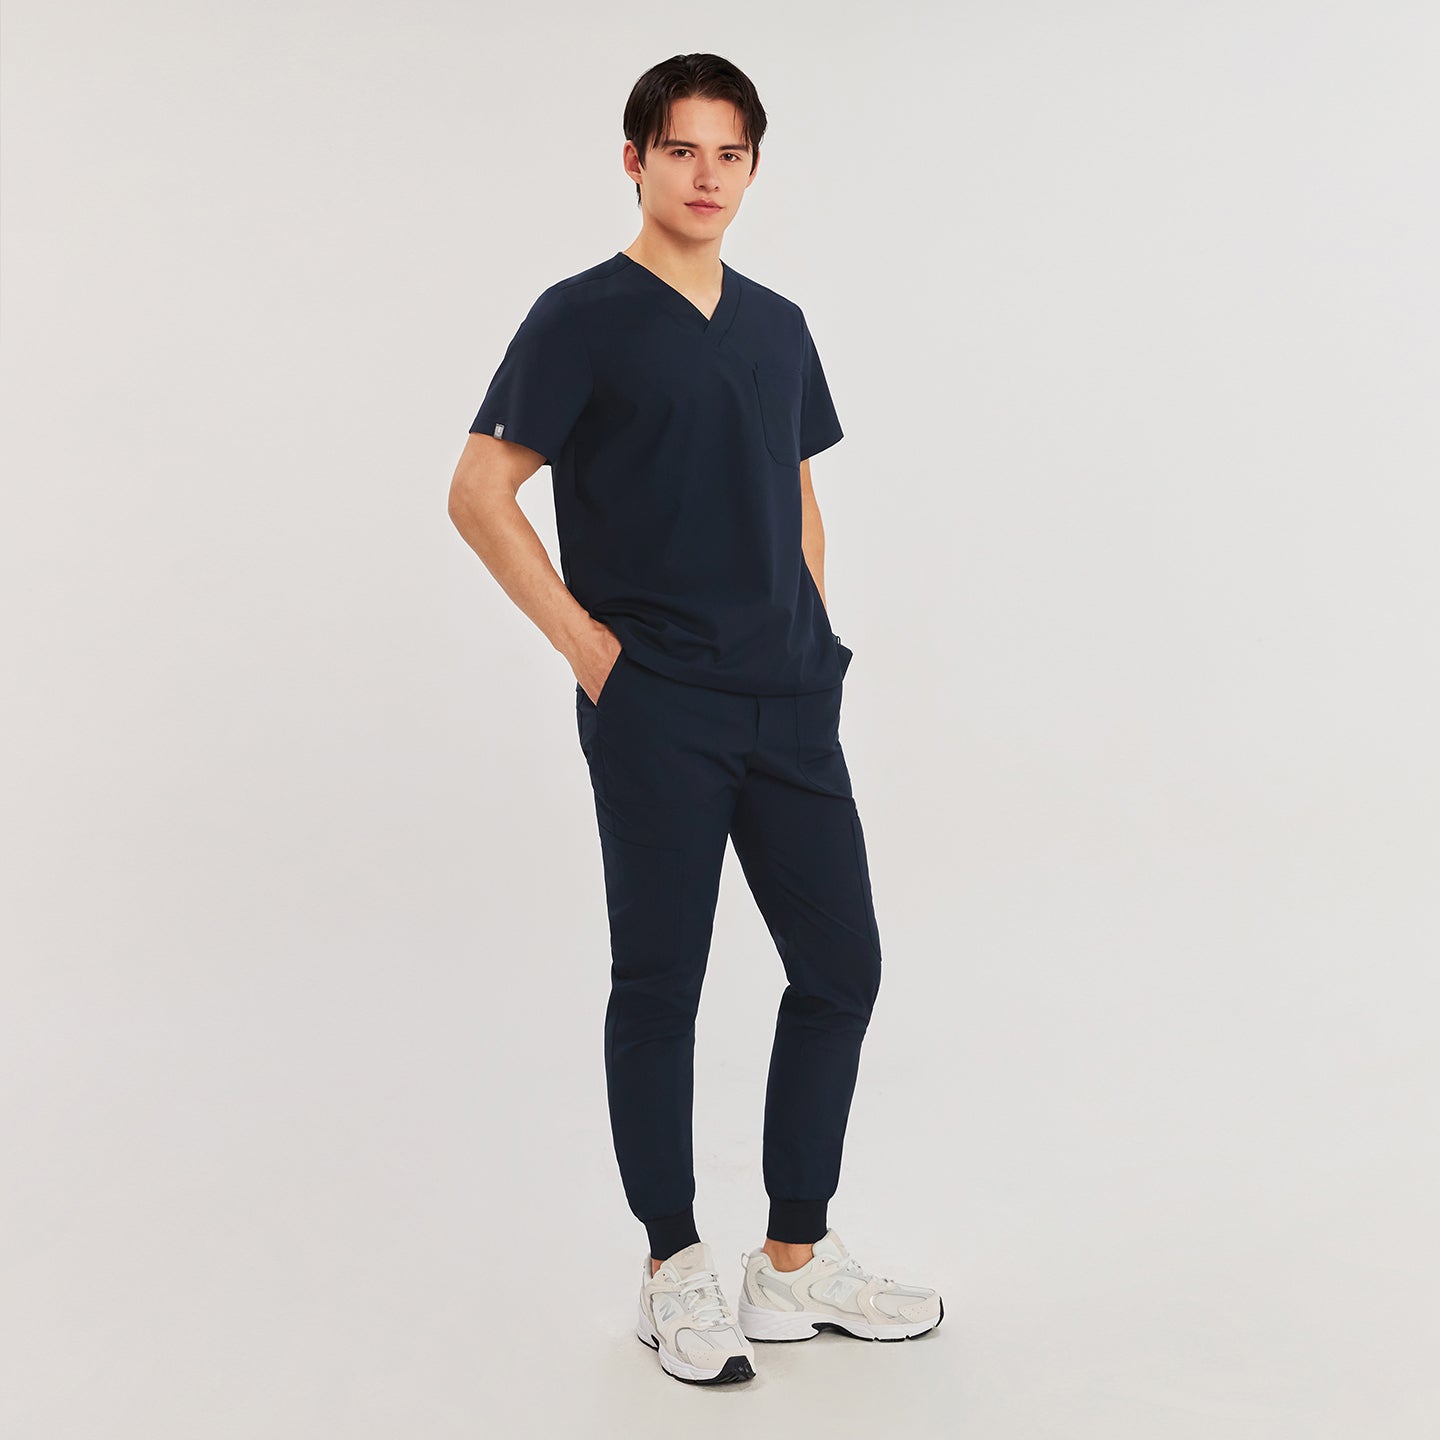  Full-body image of a man wearing jogger-style scrub pants with elastic cuffs and a V-neck scrub top, paired with white New Balance sneakers,Navy